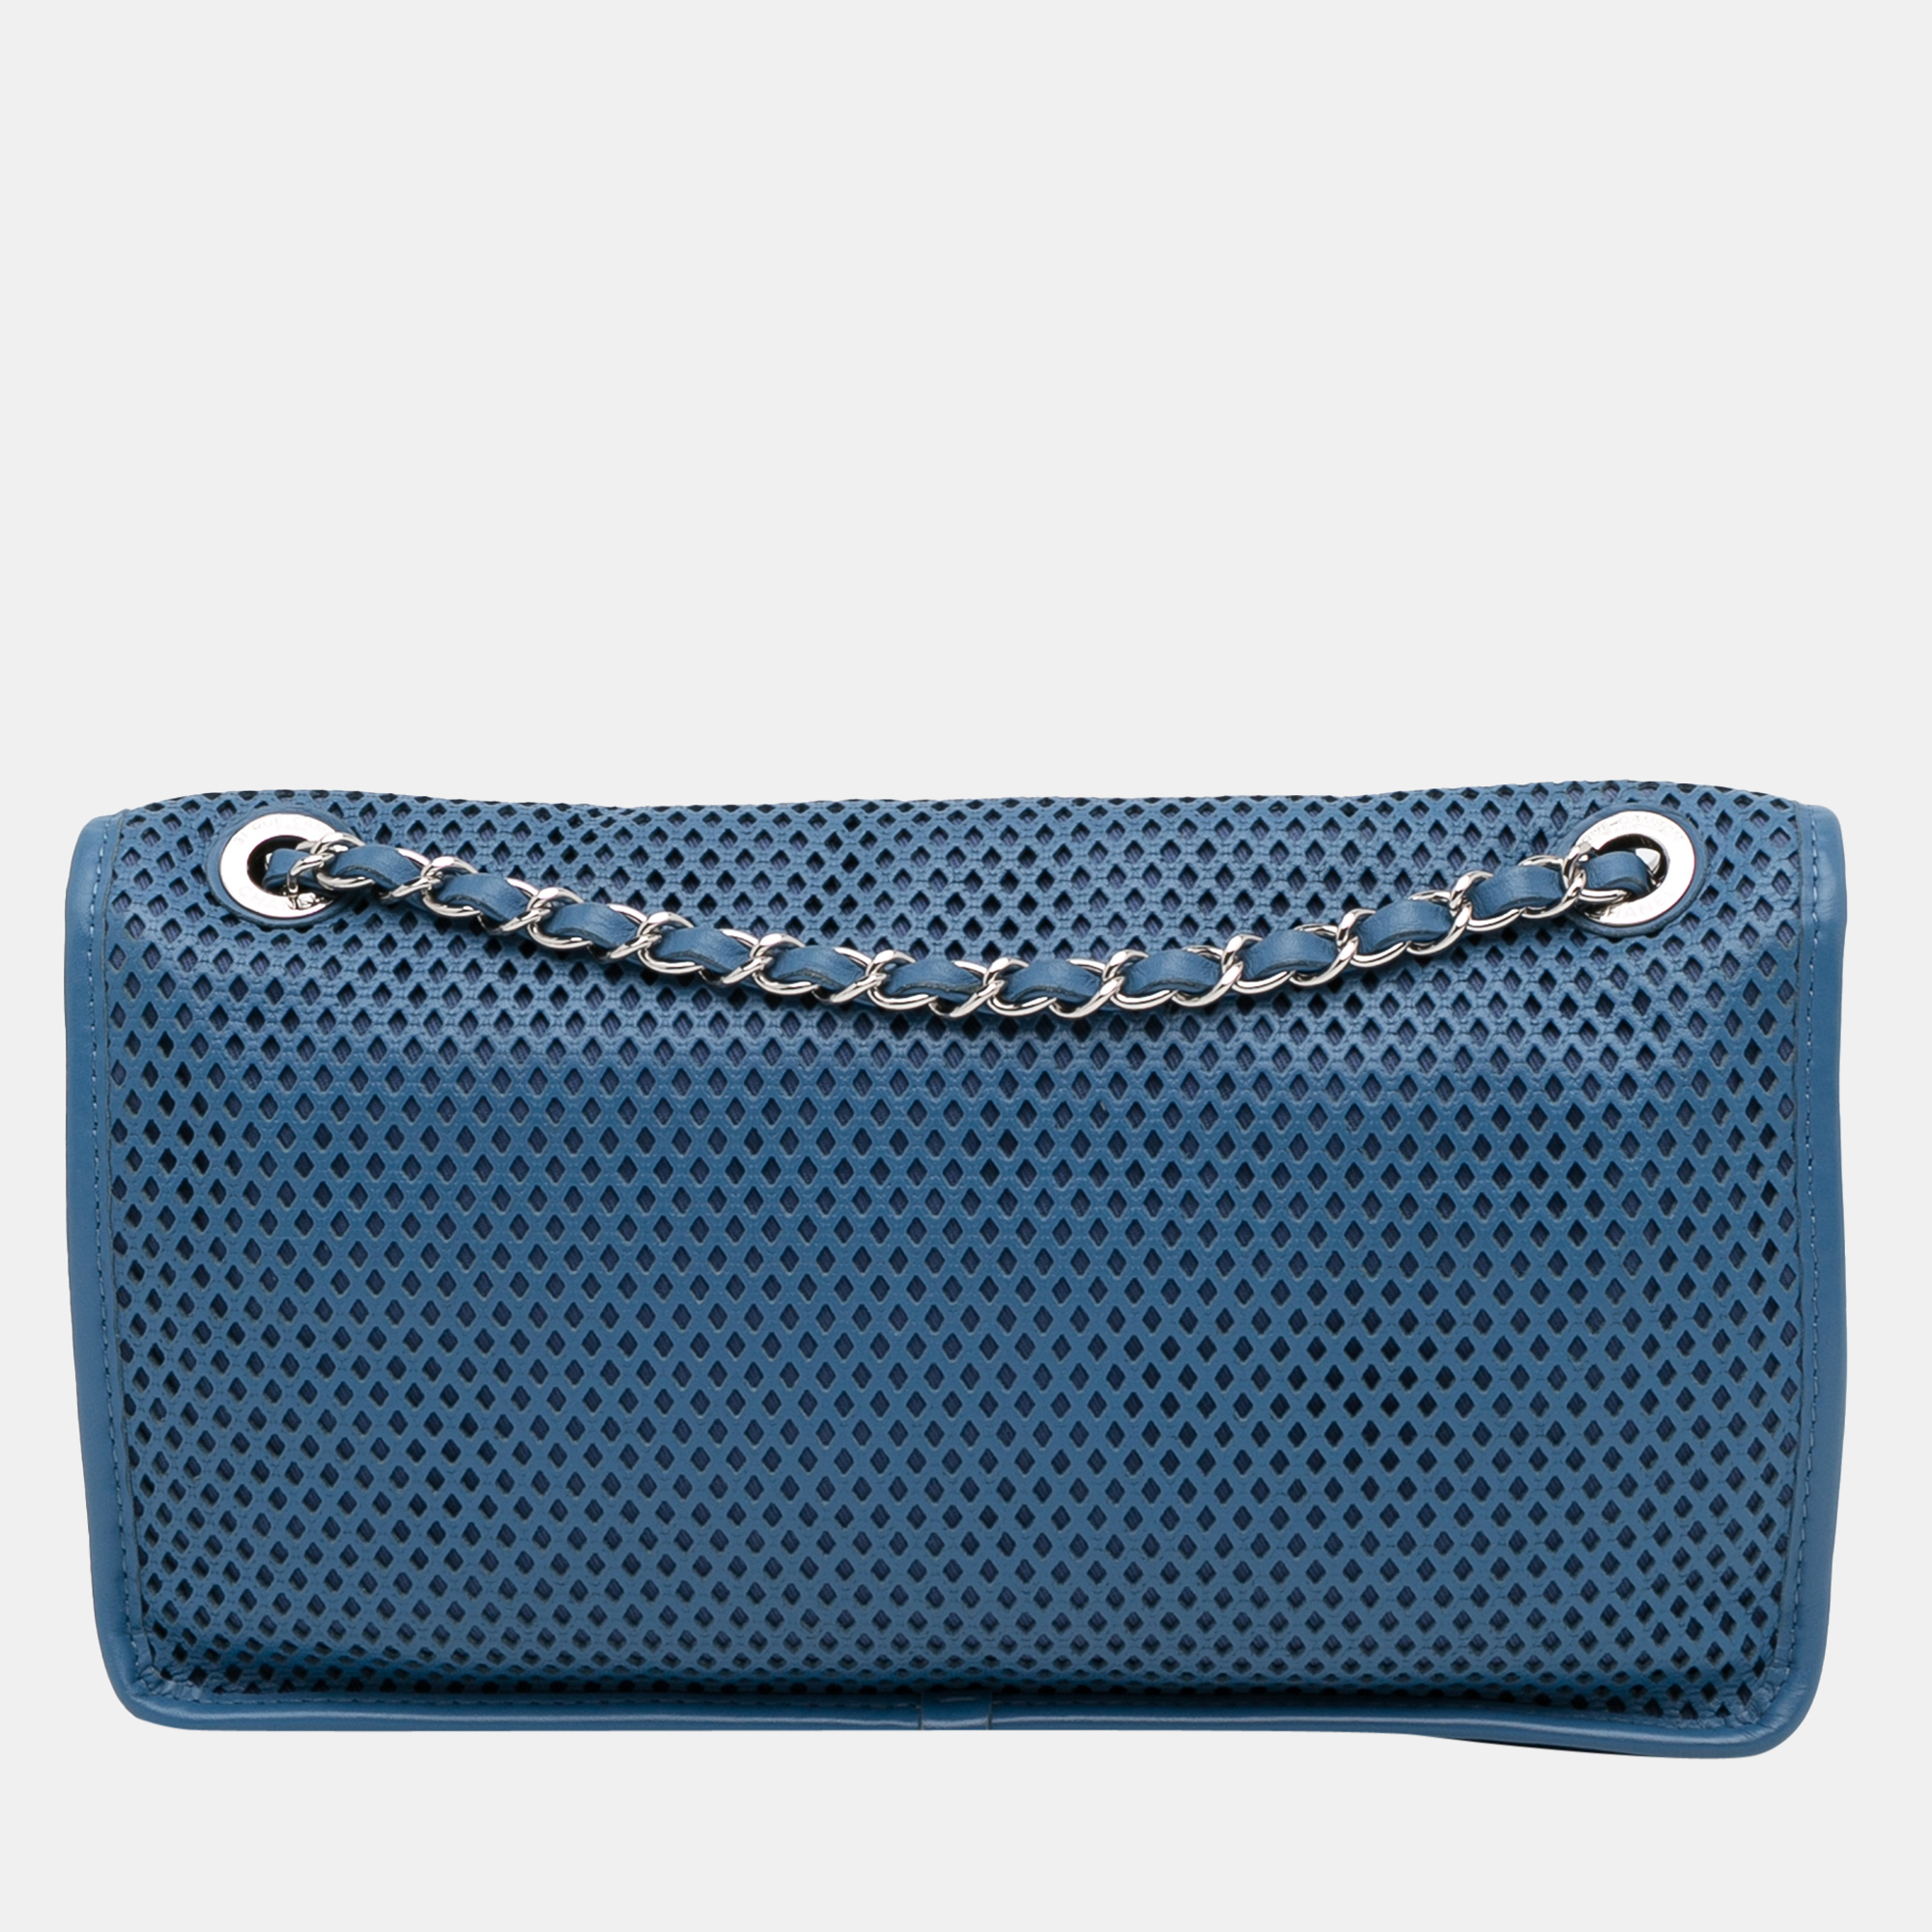 Chanel Blue Medium Up In The Air Flap